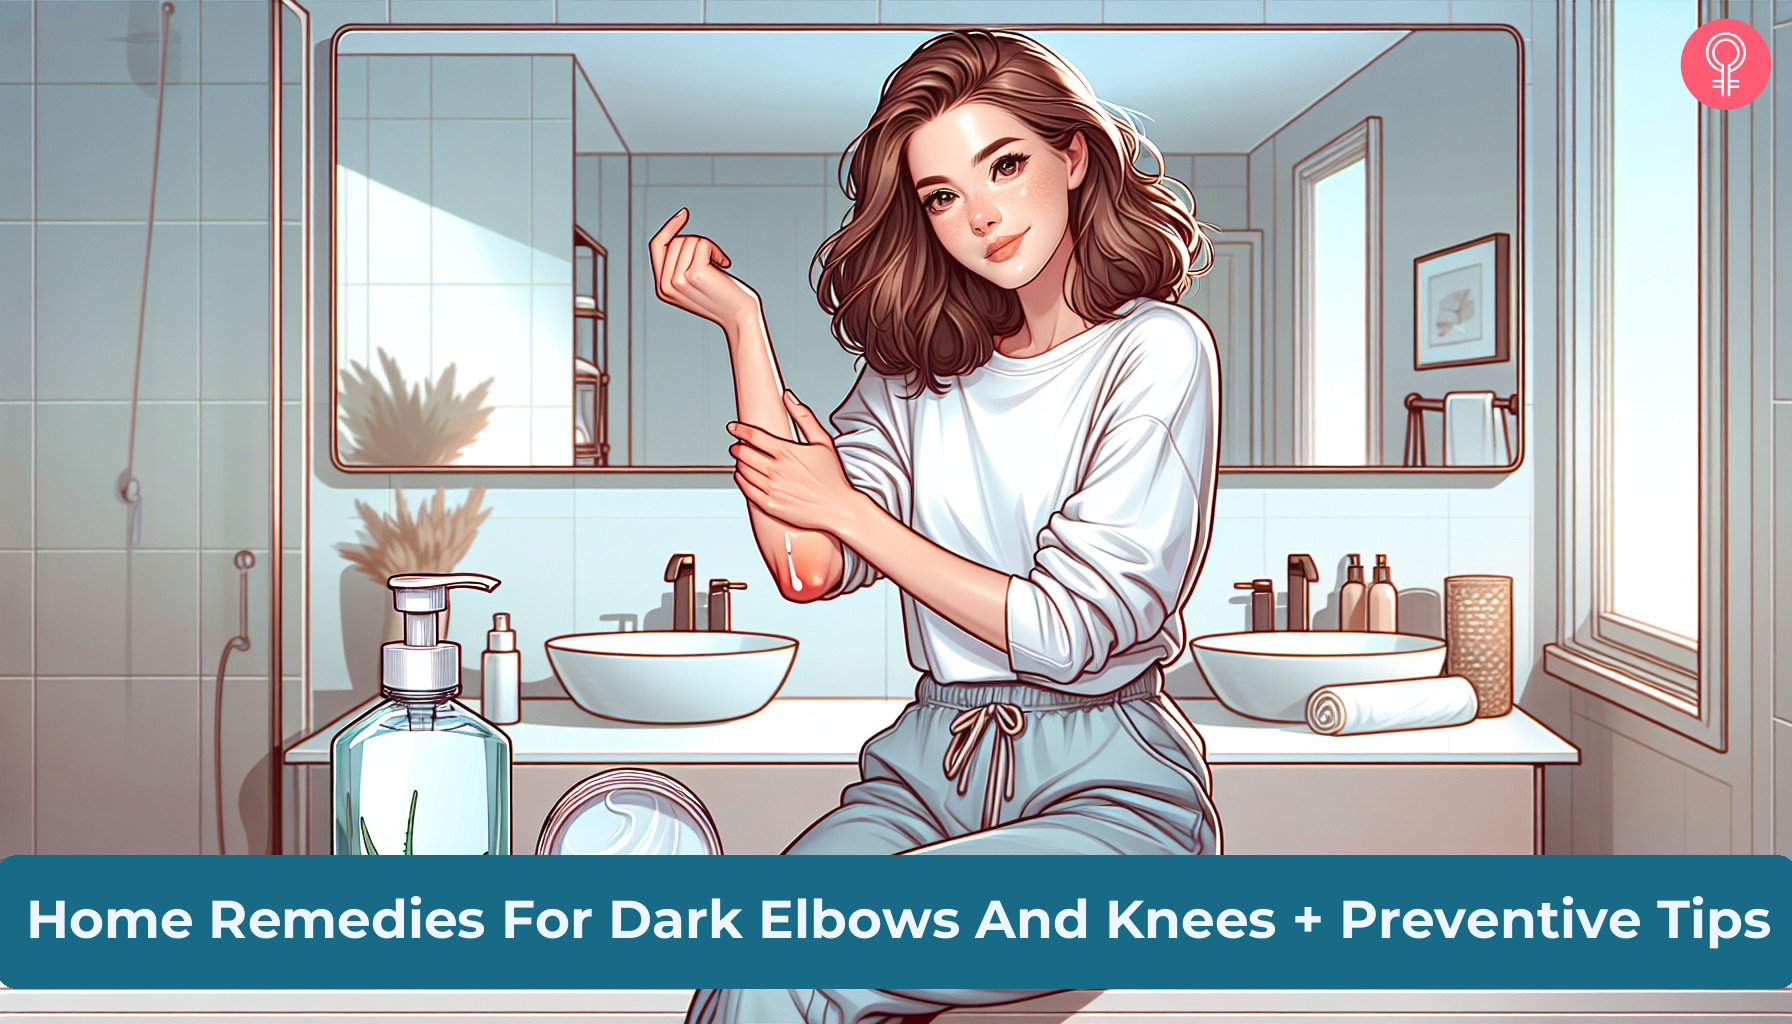 12 Home Remedies For Dark Elbows And Knees + Preventive Tips